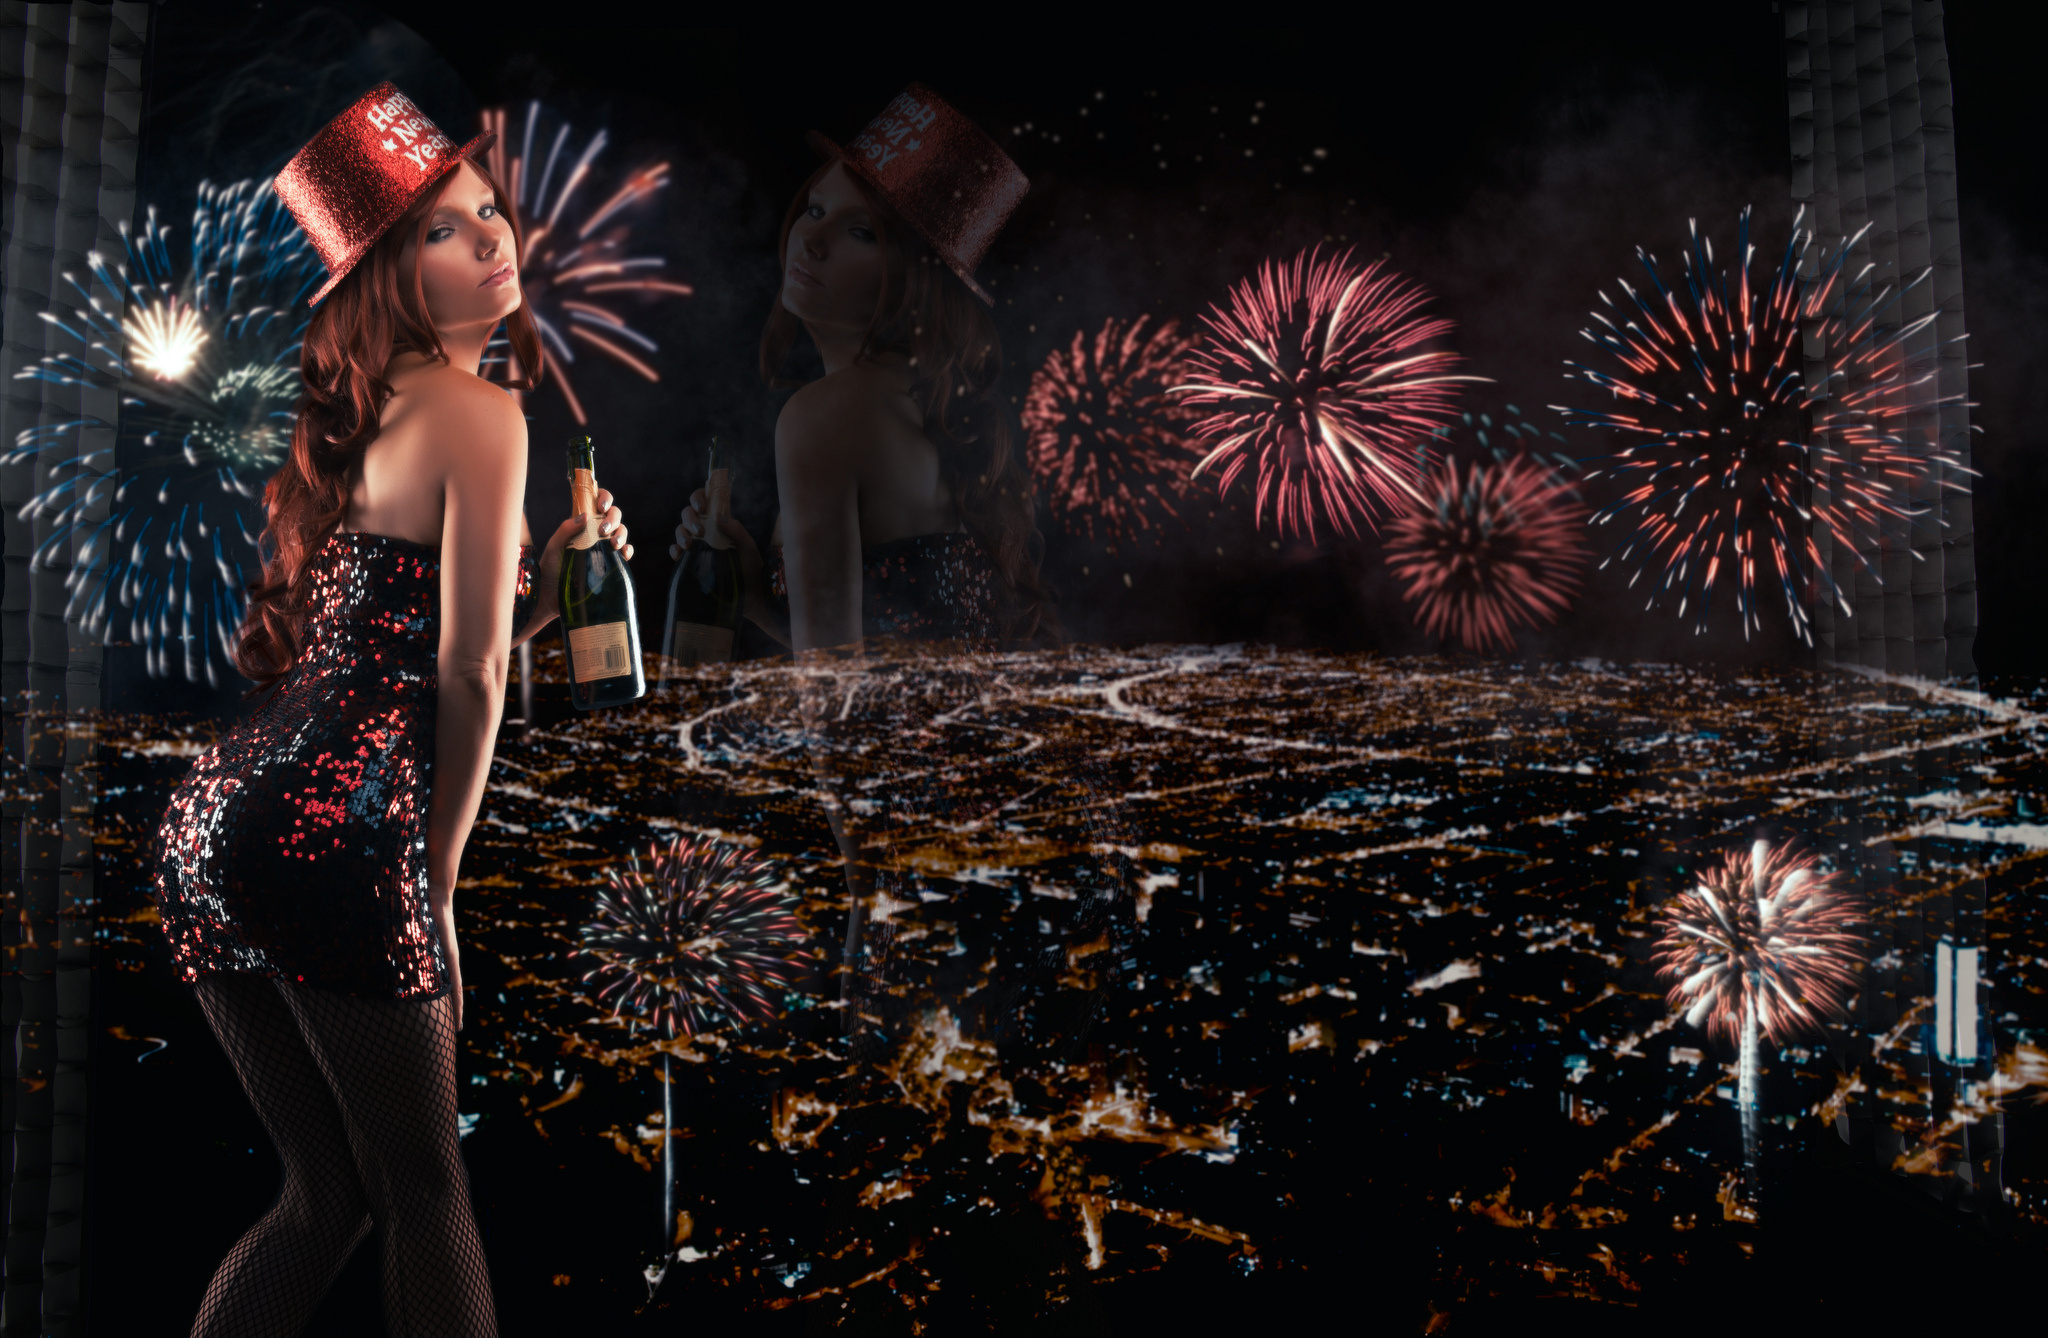 tancy, Marie, New Year, Fireworks, Night, City Wallpaper